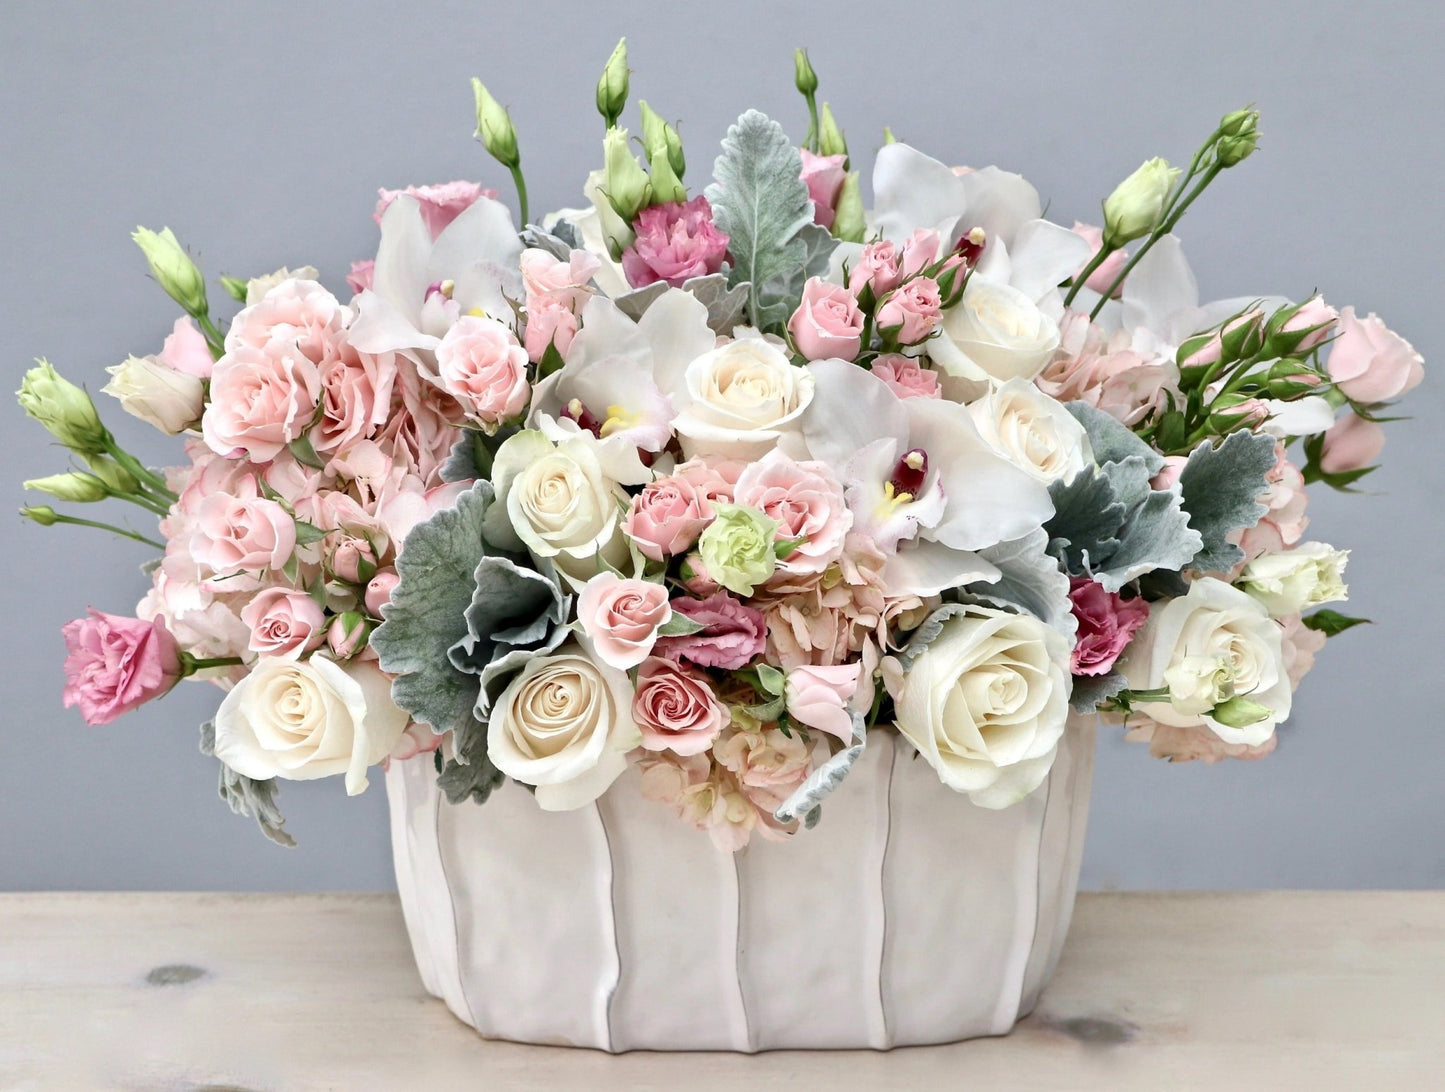 flower arrangement with orchids, lisianthus, pink spray roses, ivory roses and hydrangea in a white vase